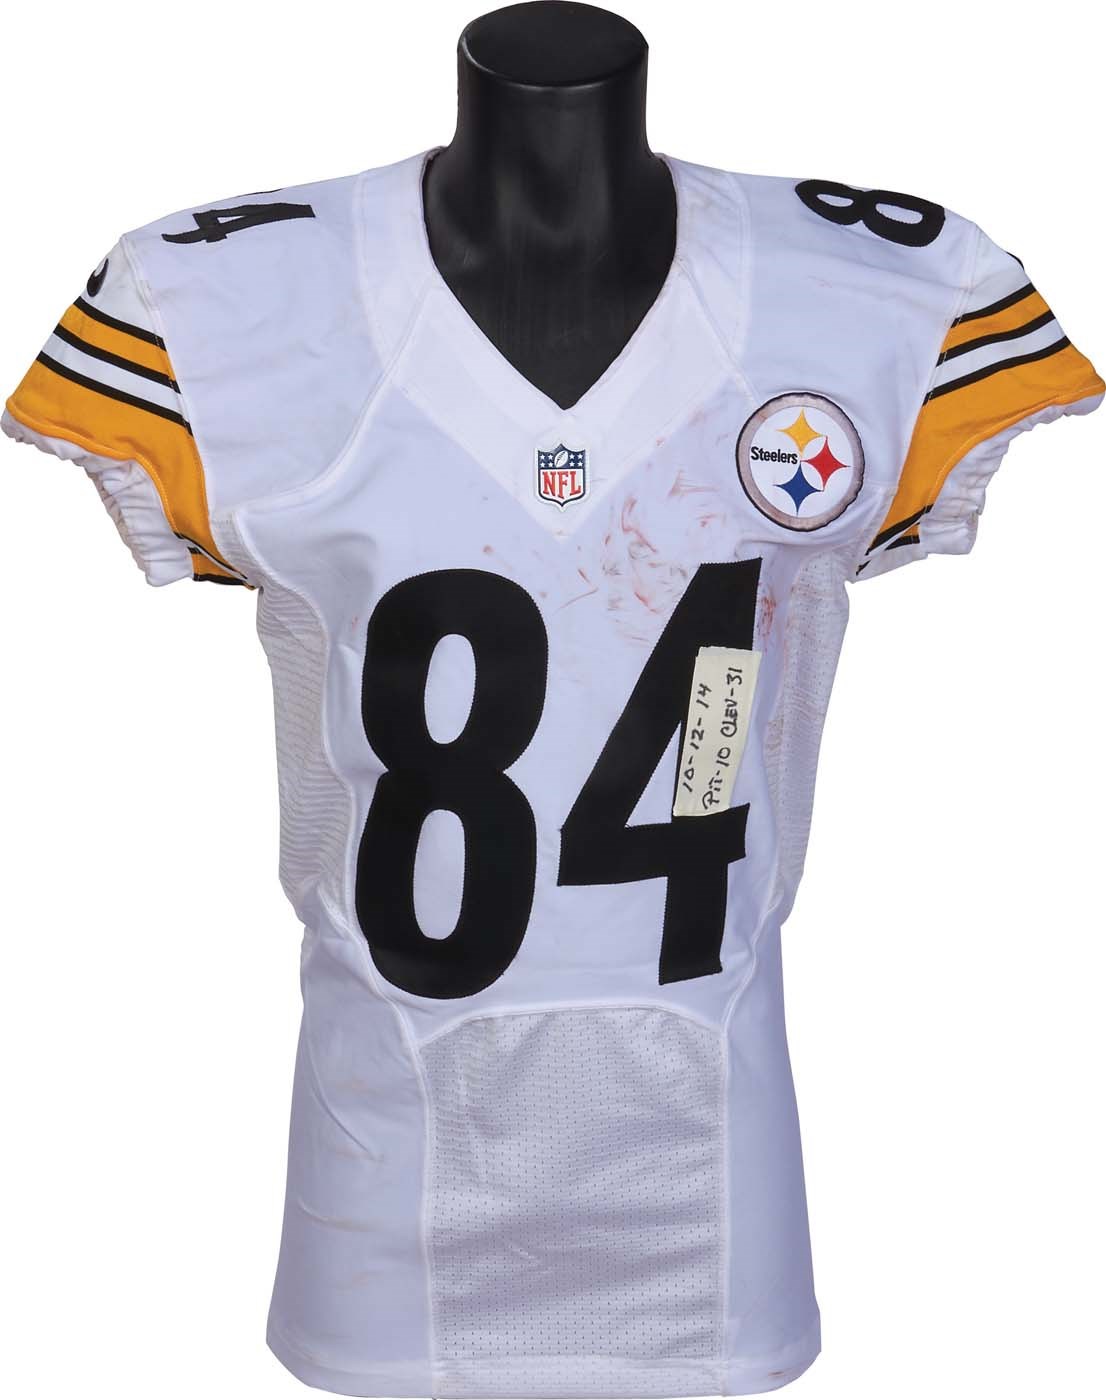 - October 12th, 2014 Antonio Brown Pittsburgh Steelers Game Worn Jersey PSA (Photo-Matched)